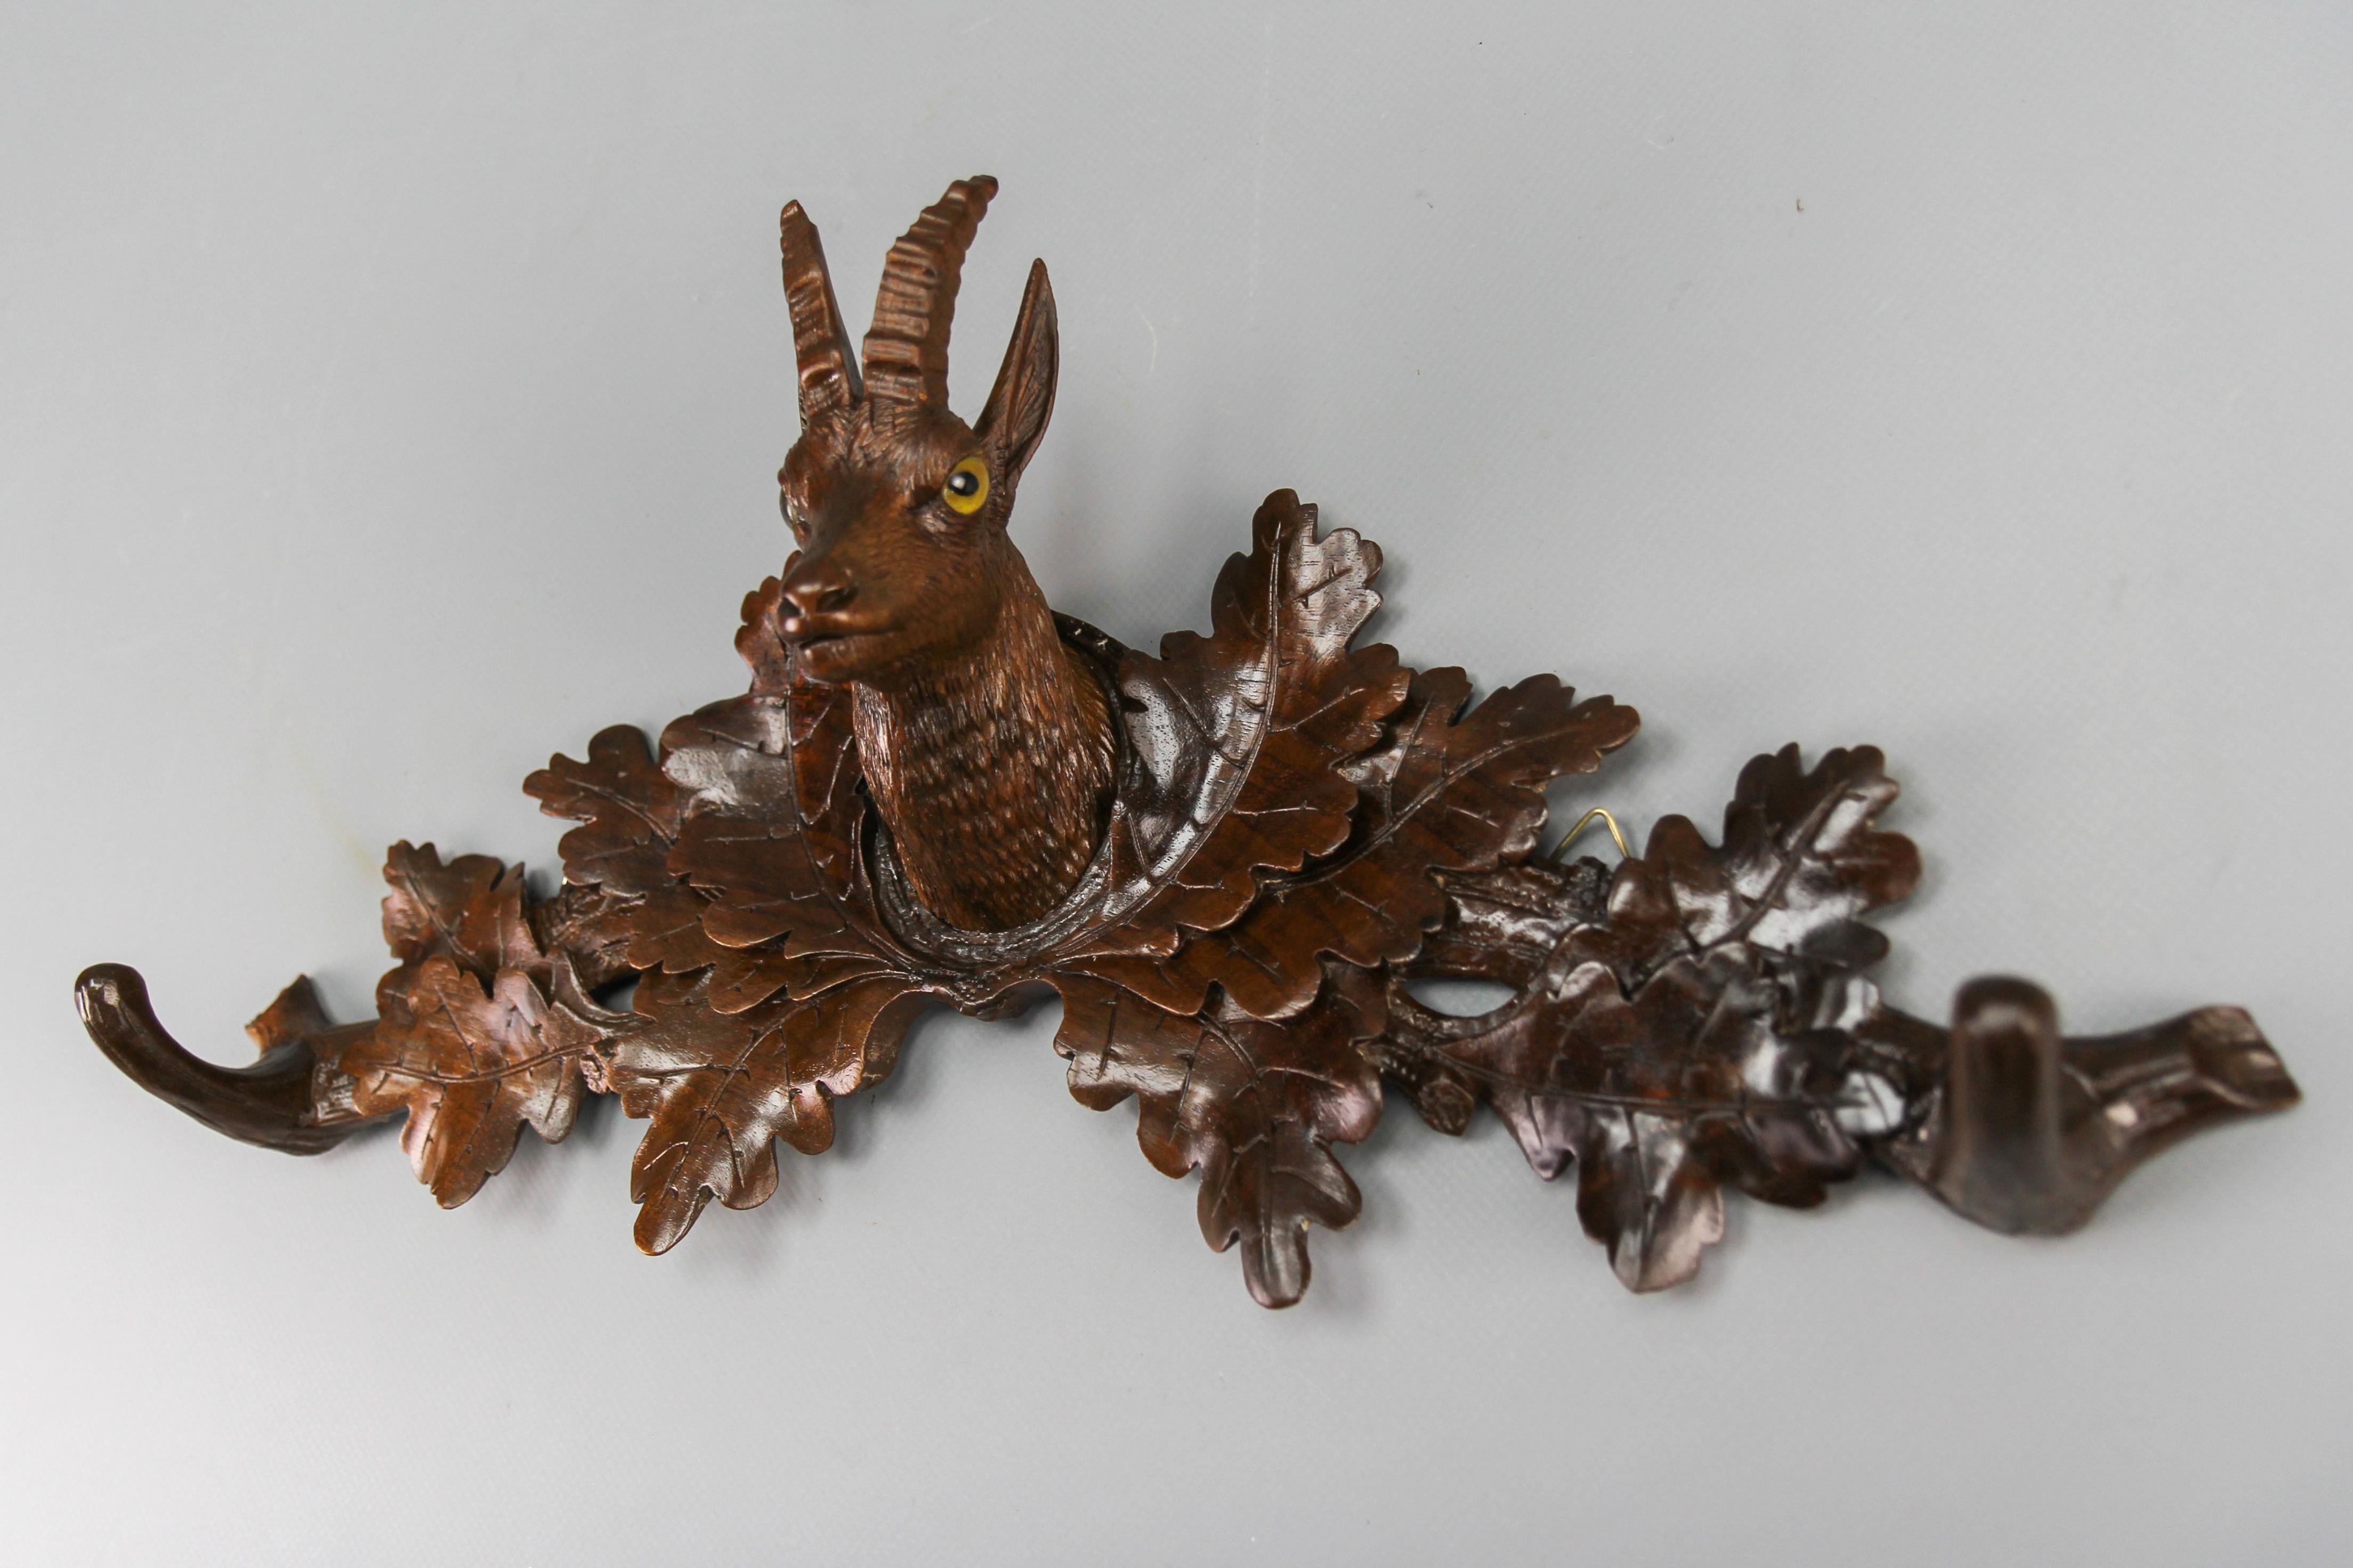 Swiss Black Forest coat rack or hat rack with chamois head and carved oak leaves, made of walnut, late 19th Century.
This antique wall-hanging coat rack features a beautifully hand-carved chamois head with glass eyes, placed at the center of the